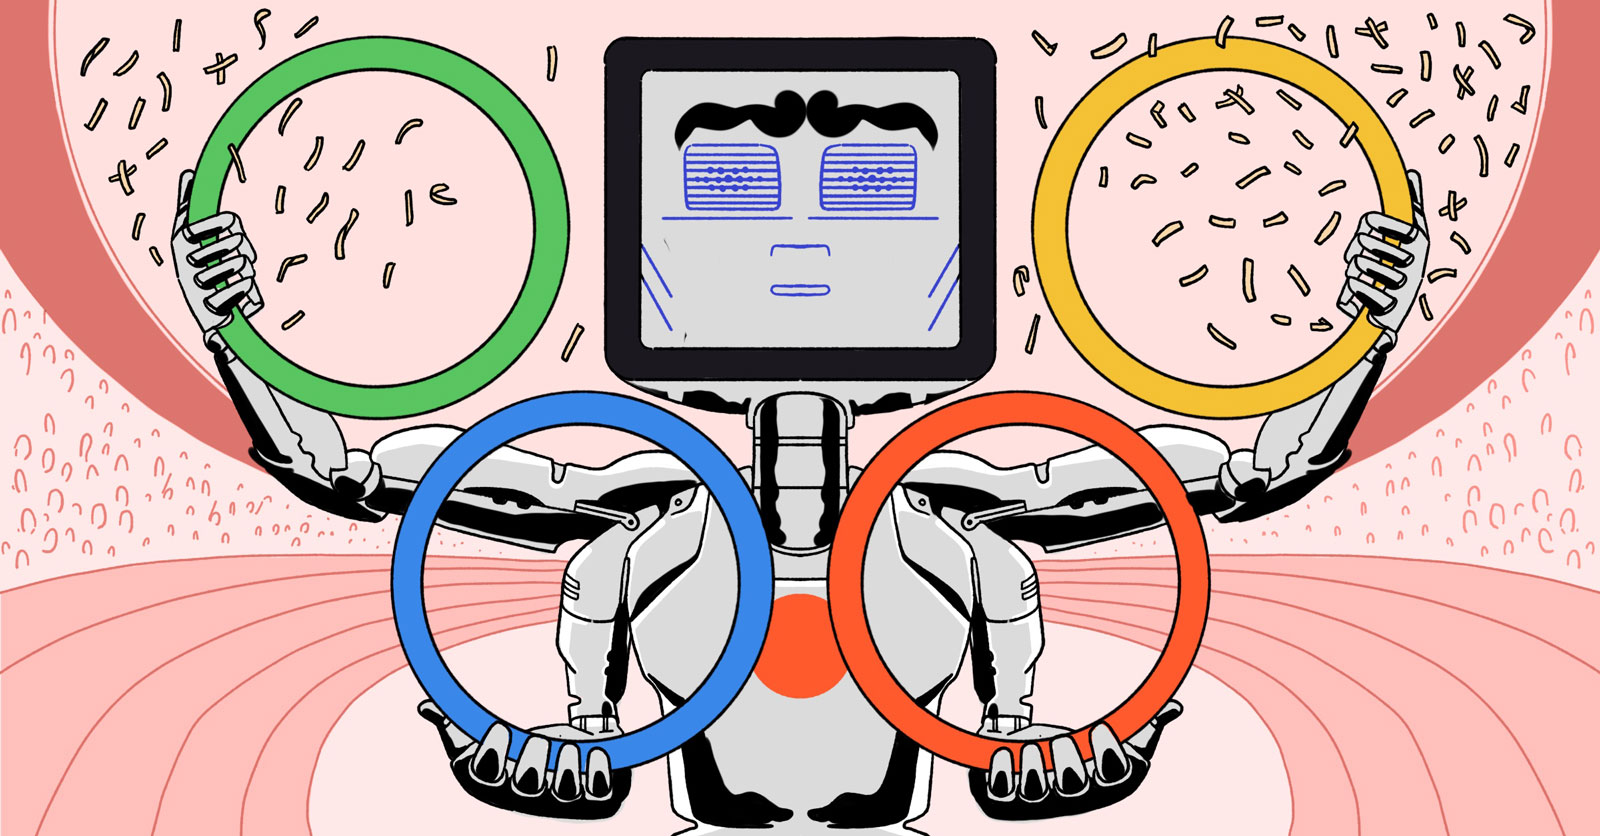 AI in Olympics -- a robot with the Olympic rings